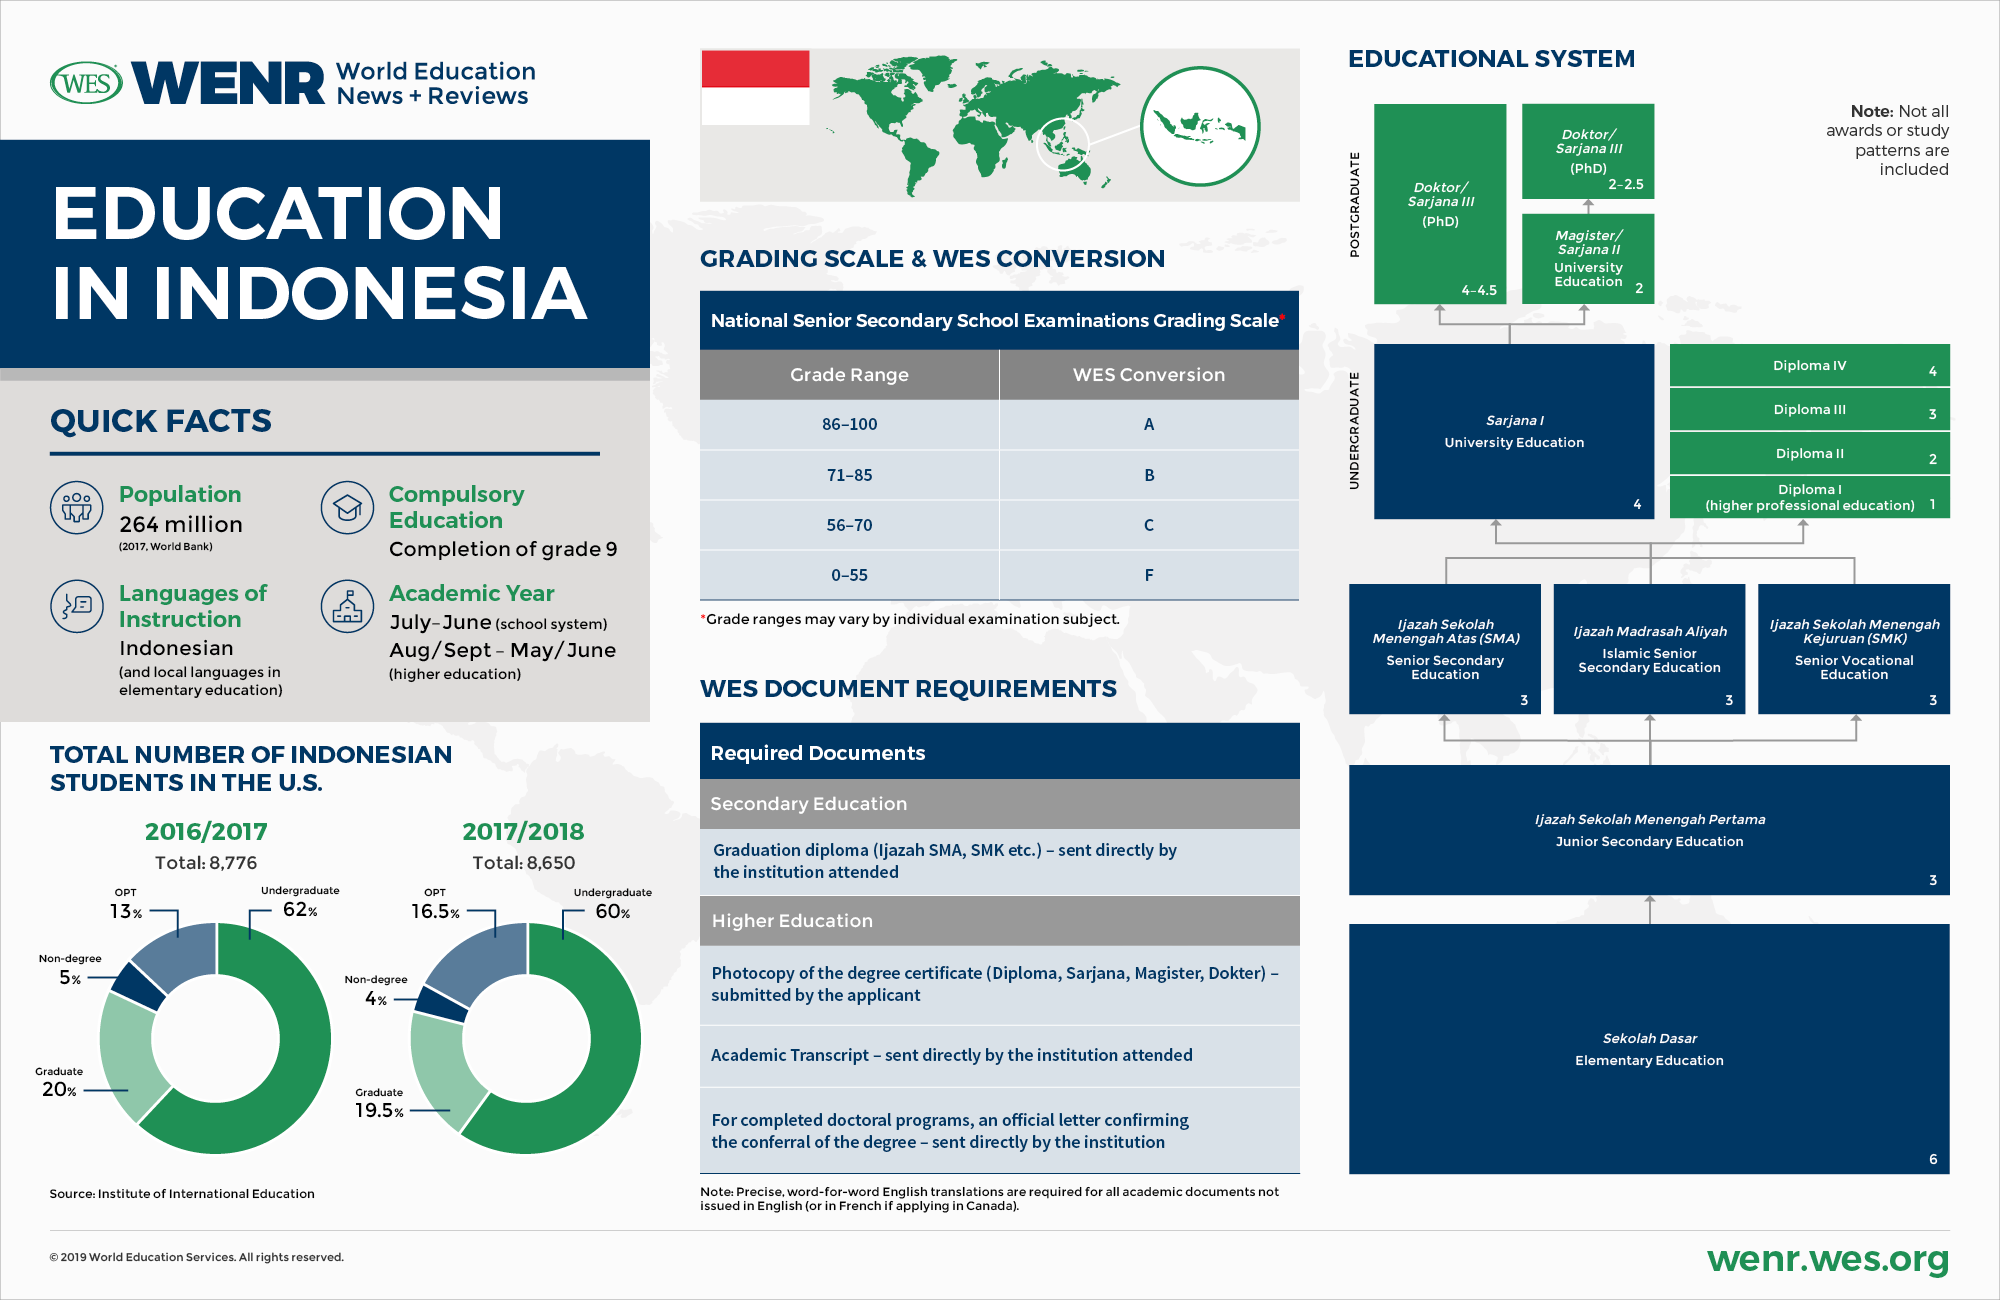 Education in Indonesia Infographic: Quick facts on the Indonesian educational system and international students